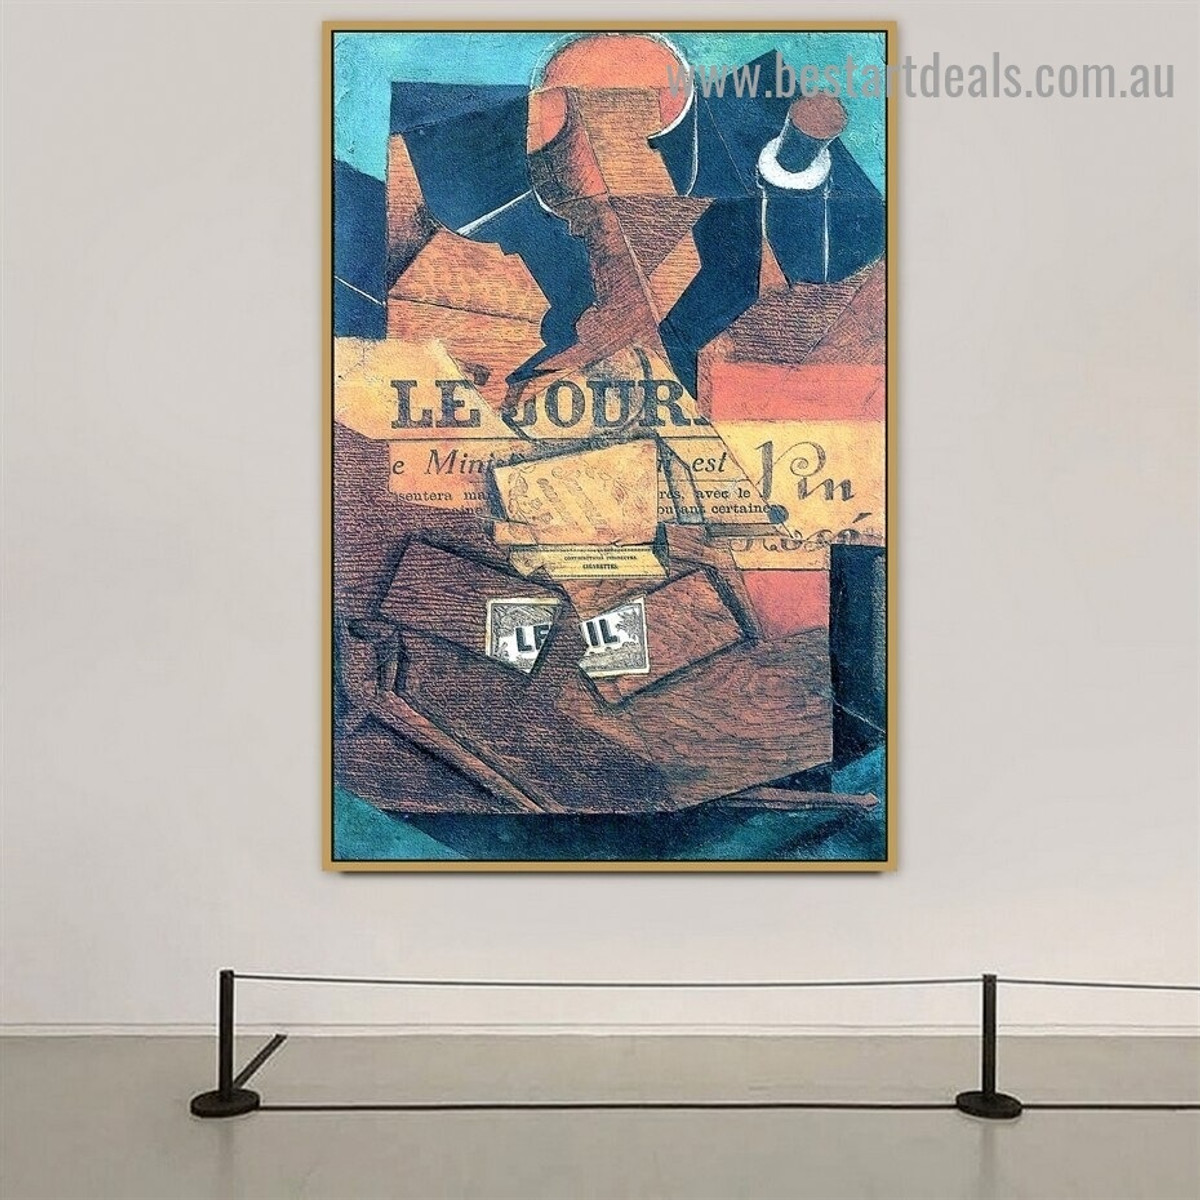 Tobacco Newspaper and Bottle of Wine Juan Gris Typography Still Life Synthetic Cubism Reproduction Portrait Painting Canvas Print for Room Wall Ornament